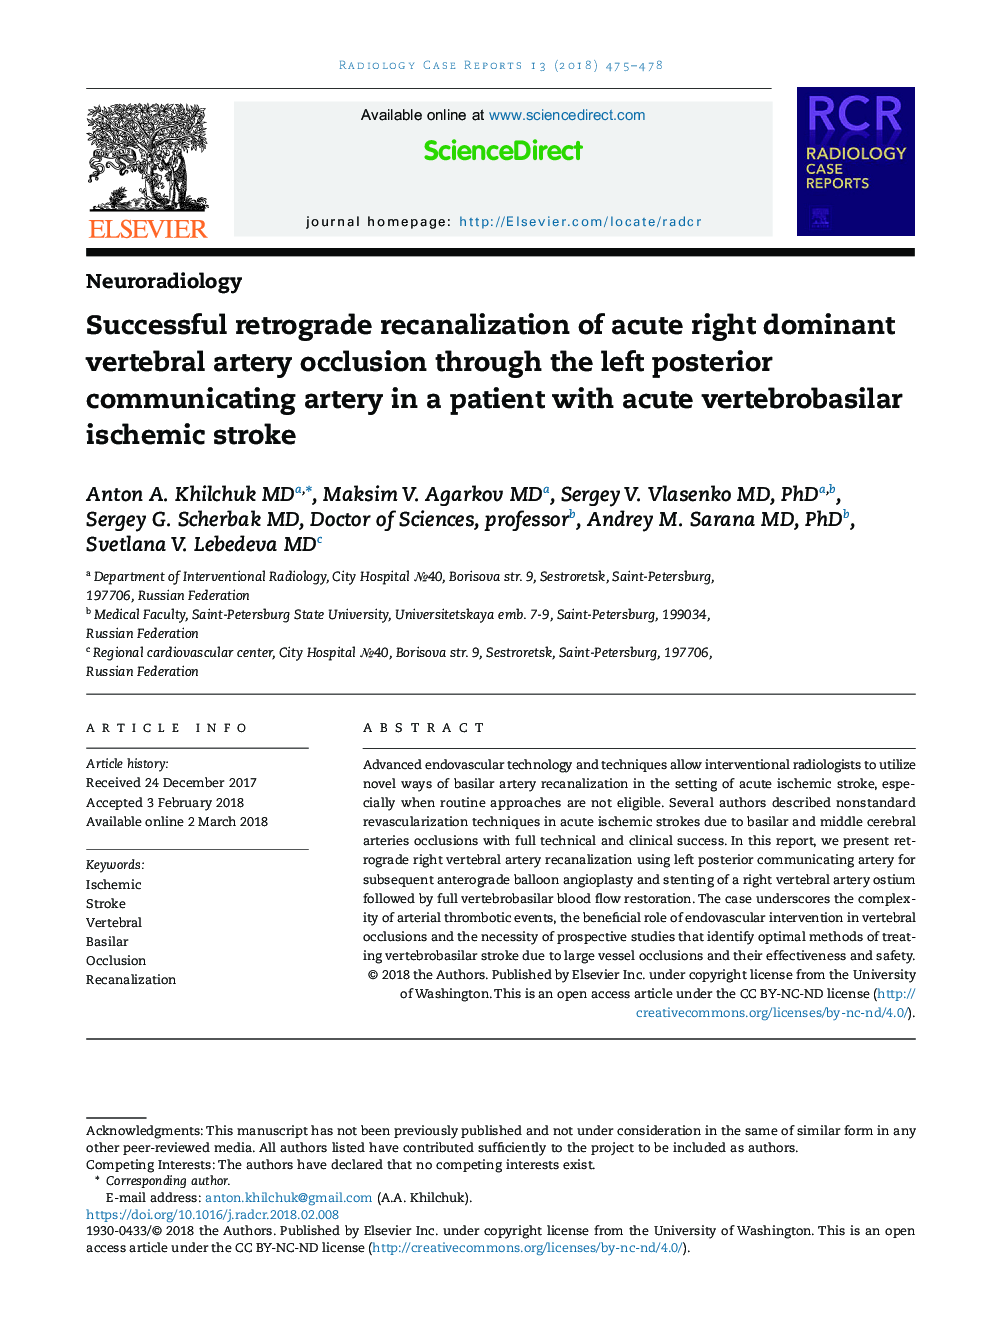 Successful retrograde recanalization of acute right dominant vertebral artery occlusion through the left posterior communicating artery in a patient with acute vertebrobasilar ischemic stroke